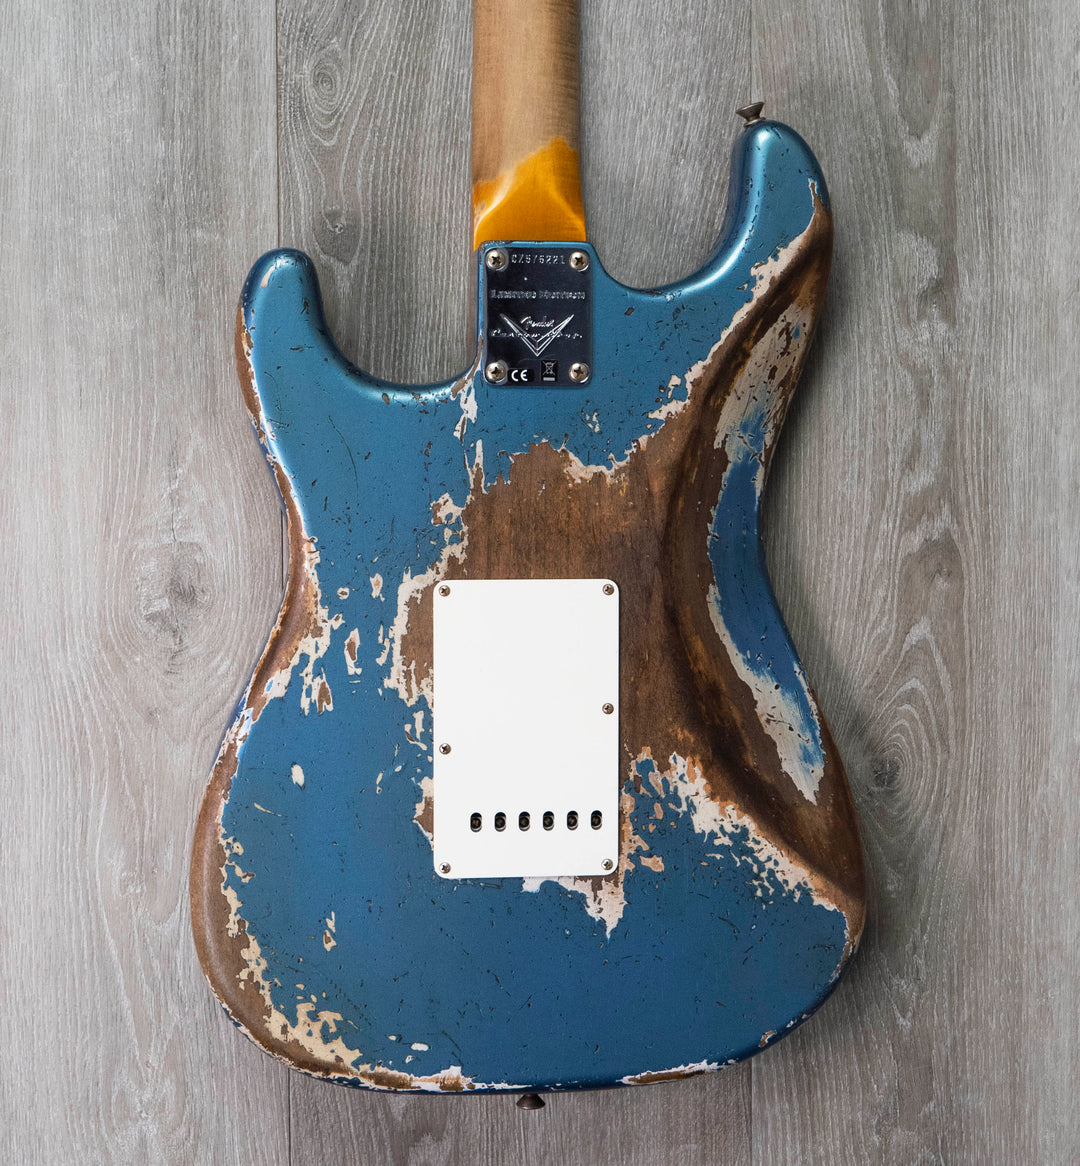 Fender Custom Shop Limited Edition Red Hot Strat Super Heavy Relic, Maple Fingerboard, Super Faded Aged Lake Placid Blue